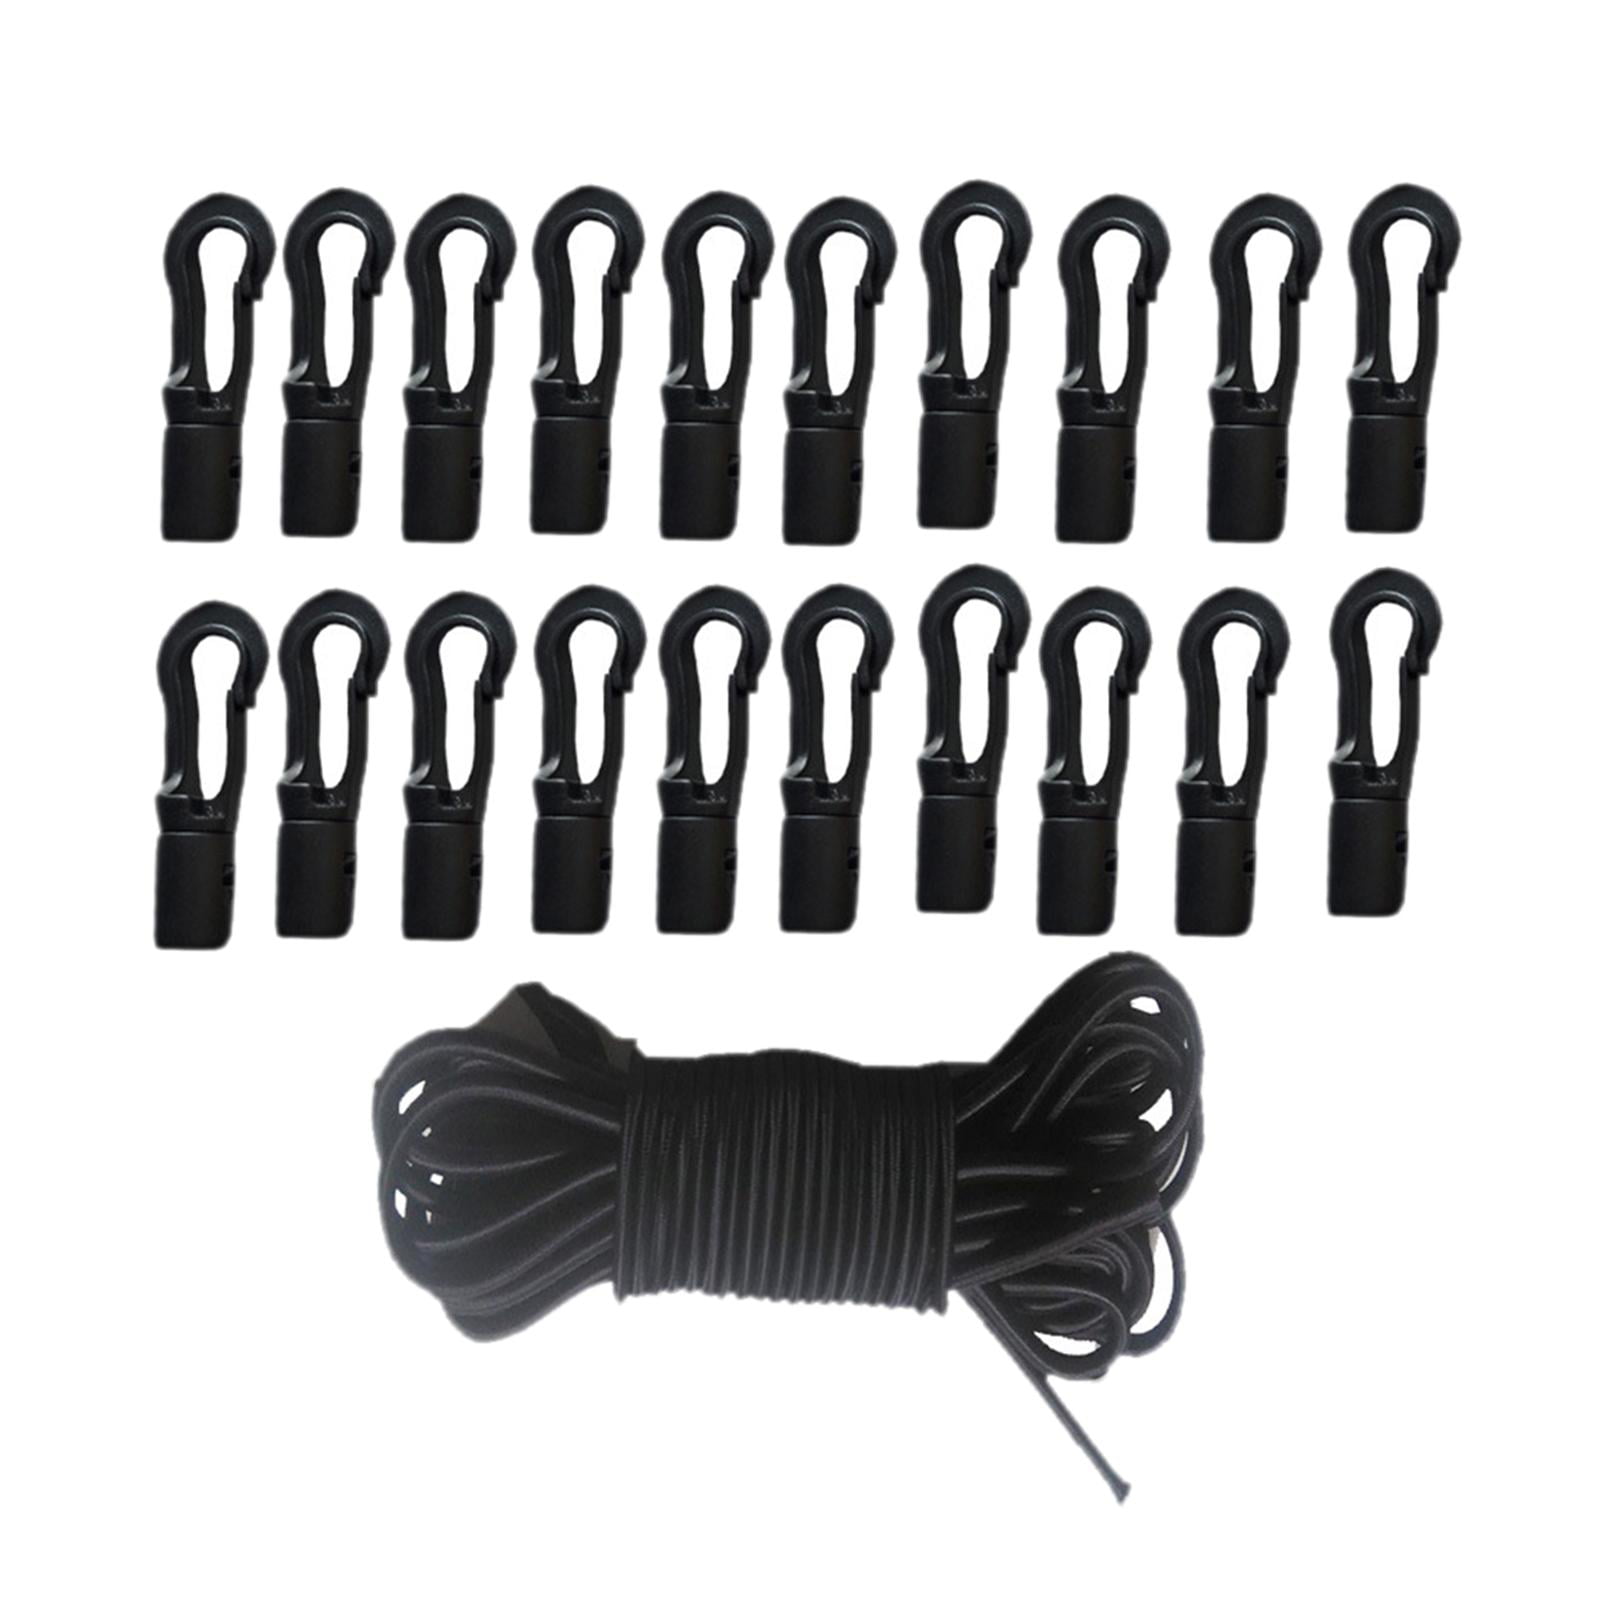 Elastic Bungee Rope w/ 20pcs Bungee Cord Clips for Kayak Camping Indoor 